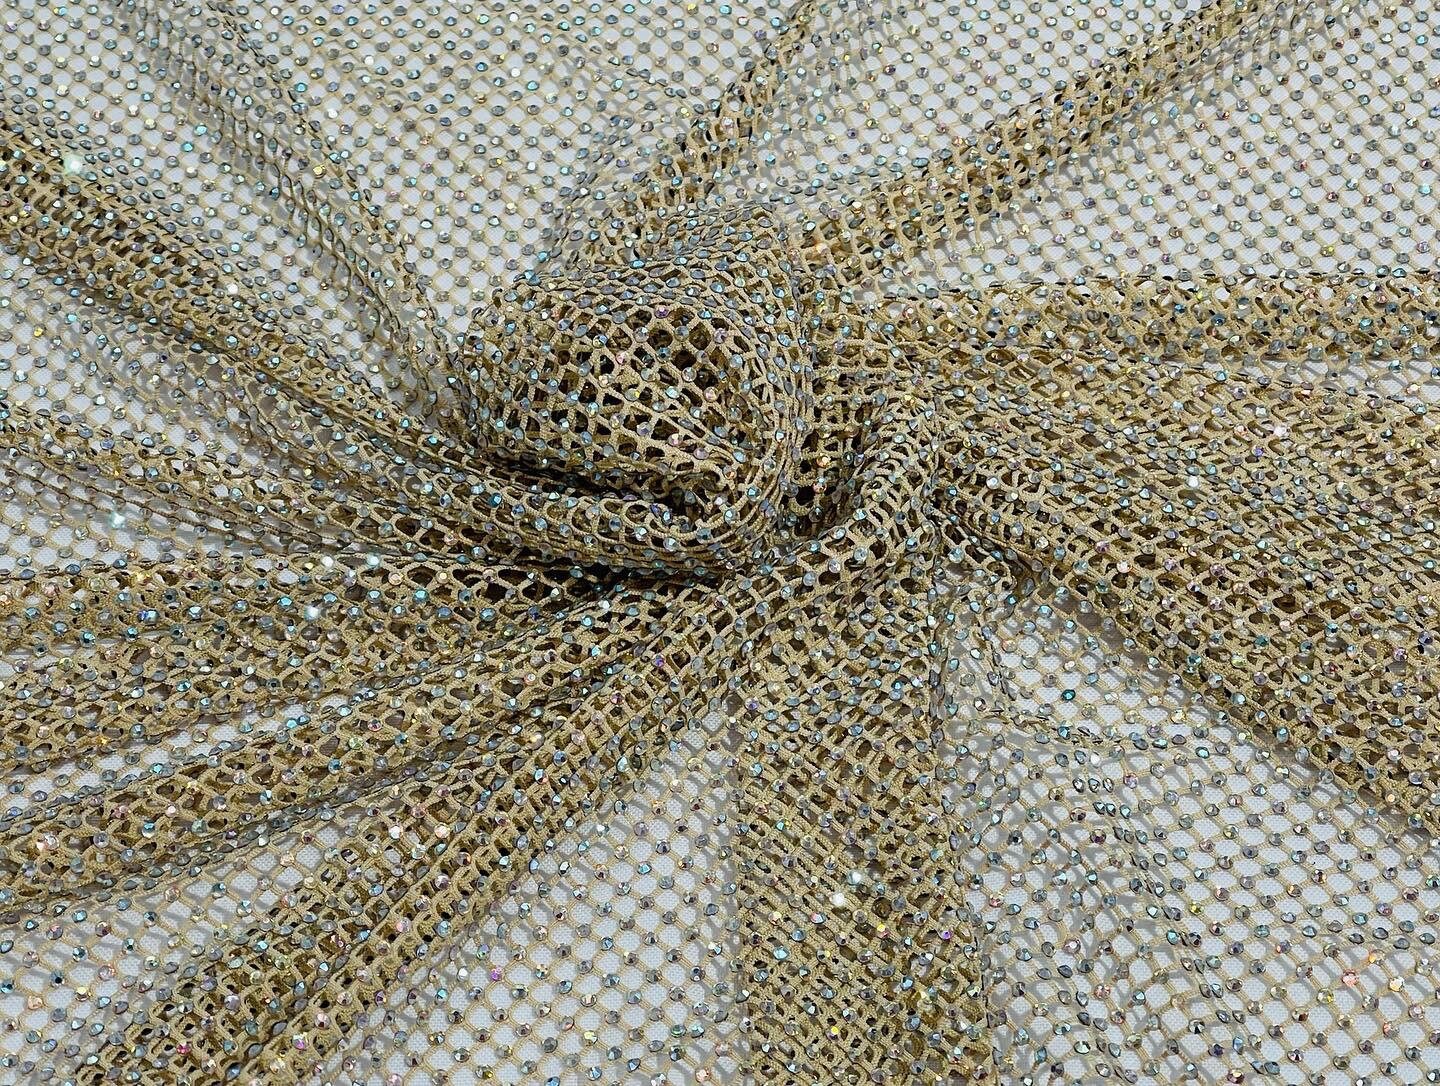 Fishnet Fabric by the Yard 